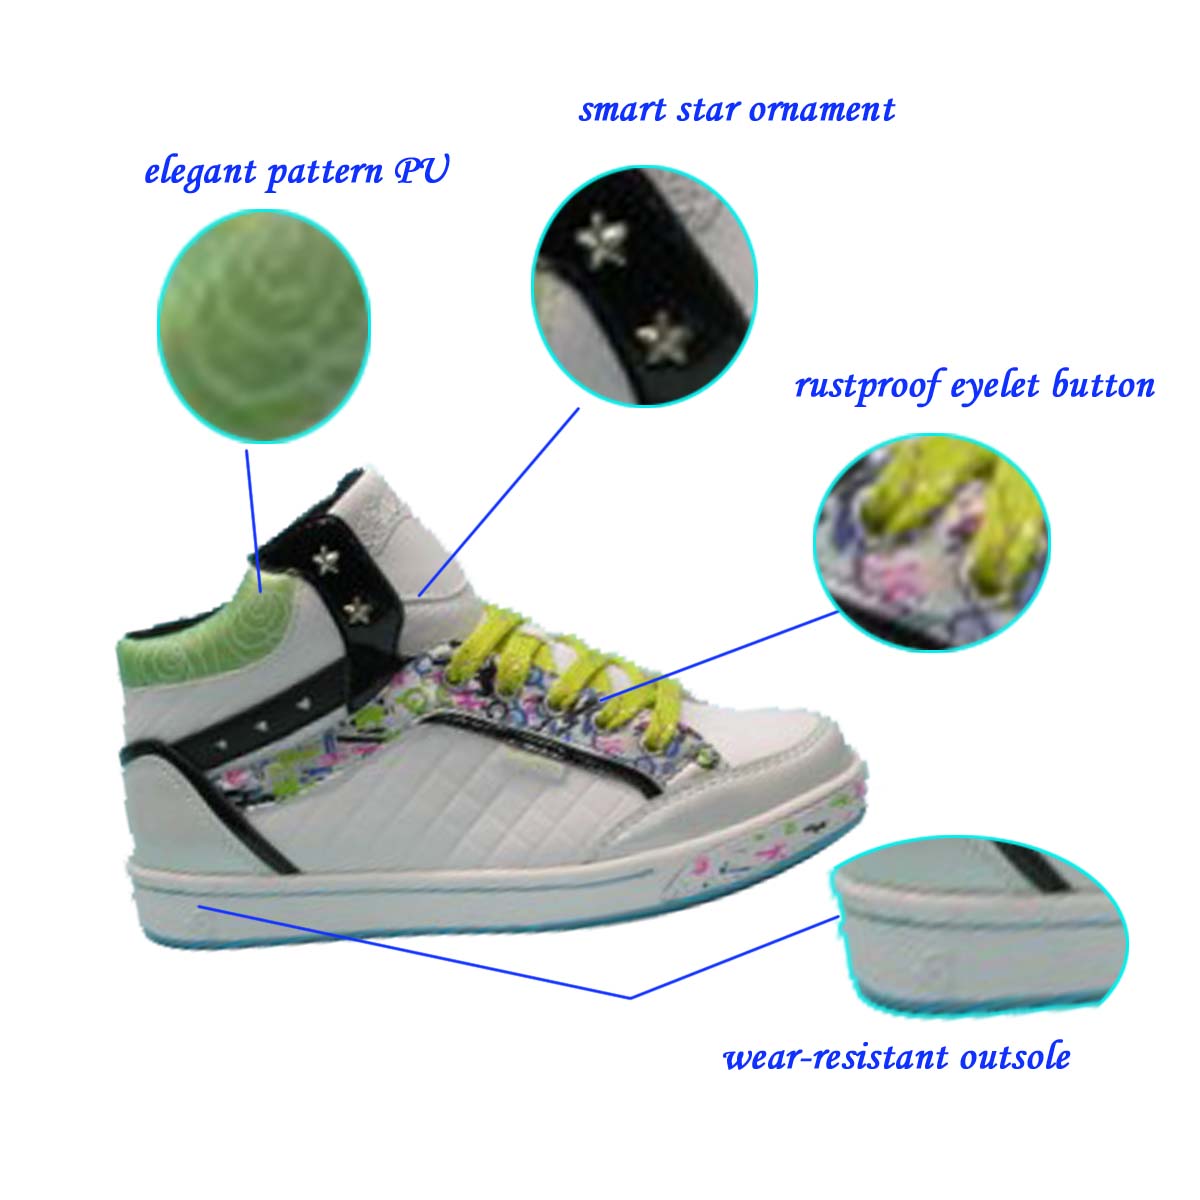 Latest Design Women Original Superstar Skateboard Shoes Casual Sneakers With 3M Colorful Reflective Upper Material Shoes